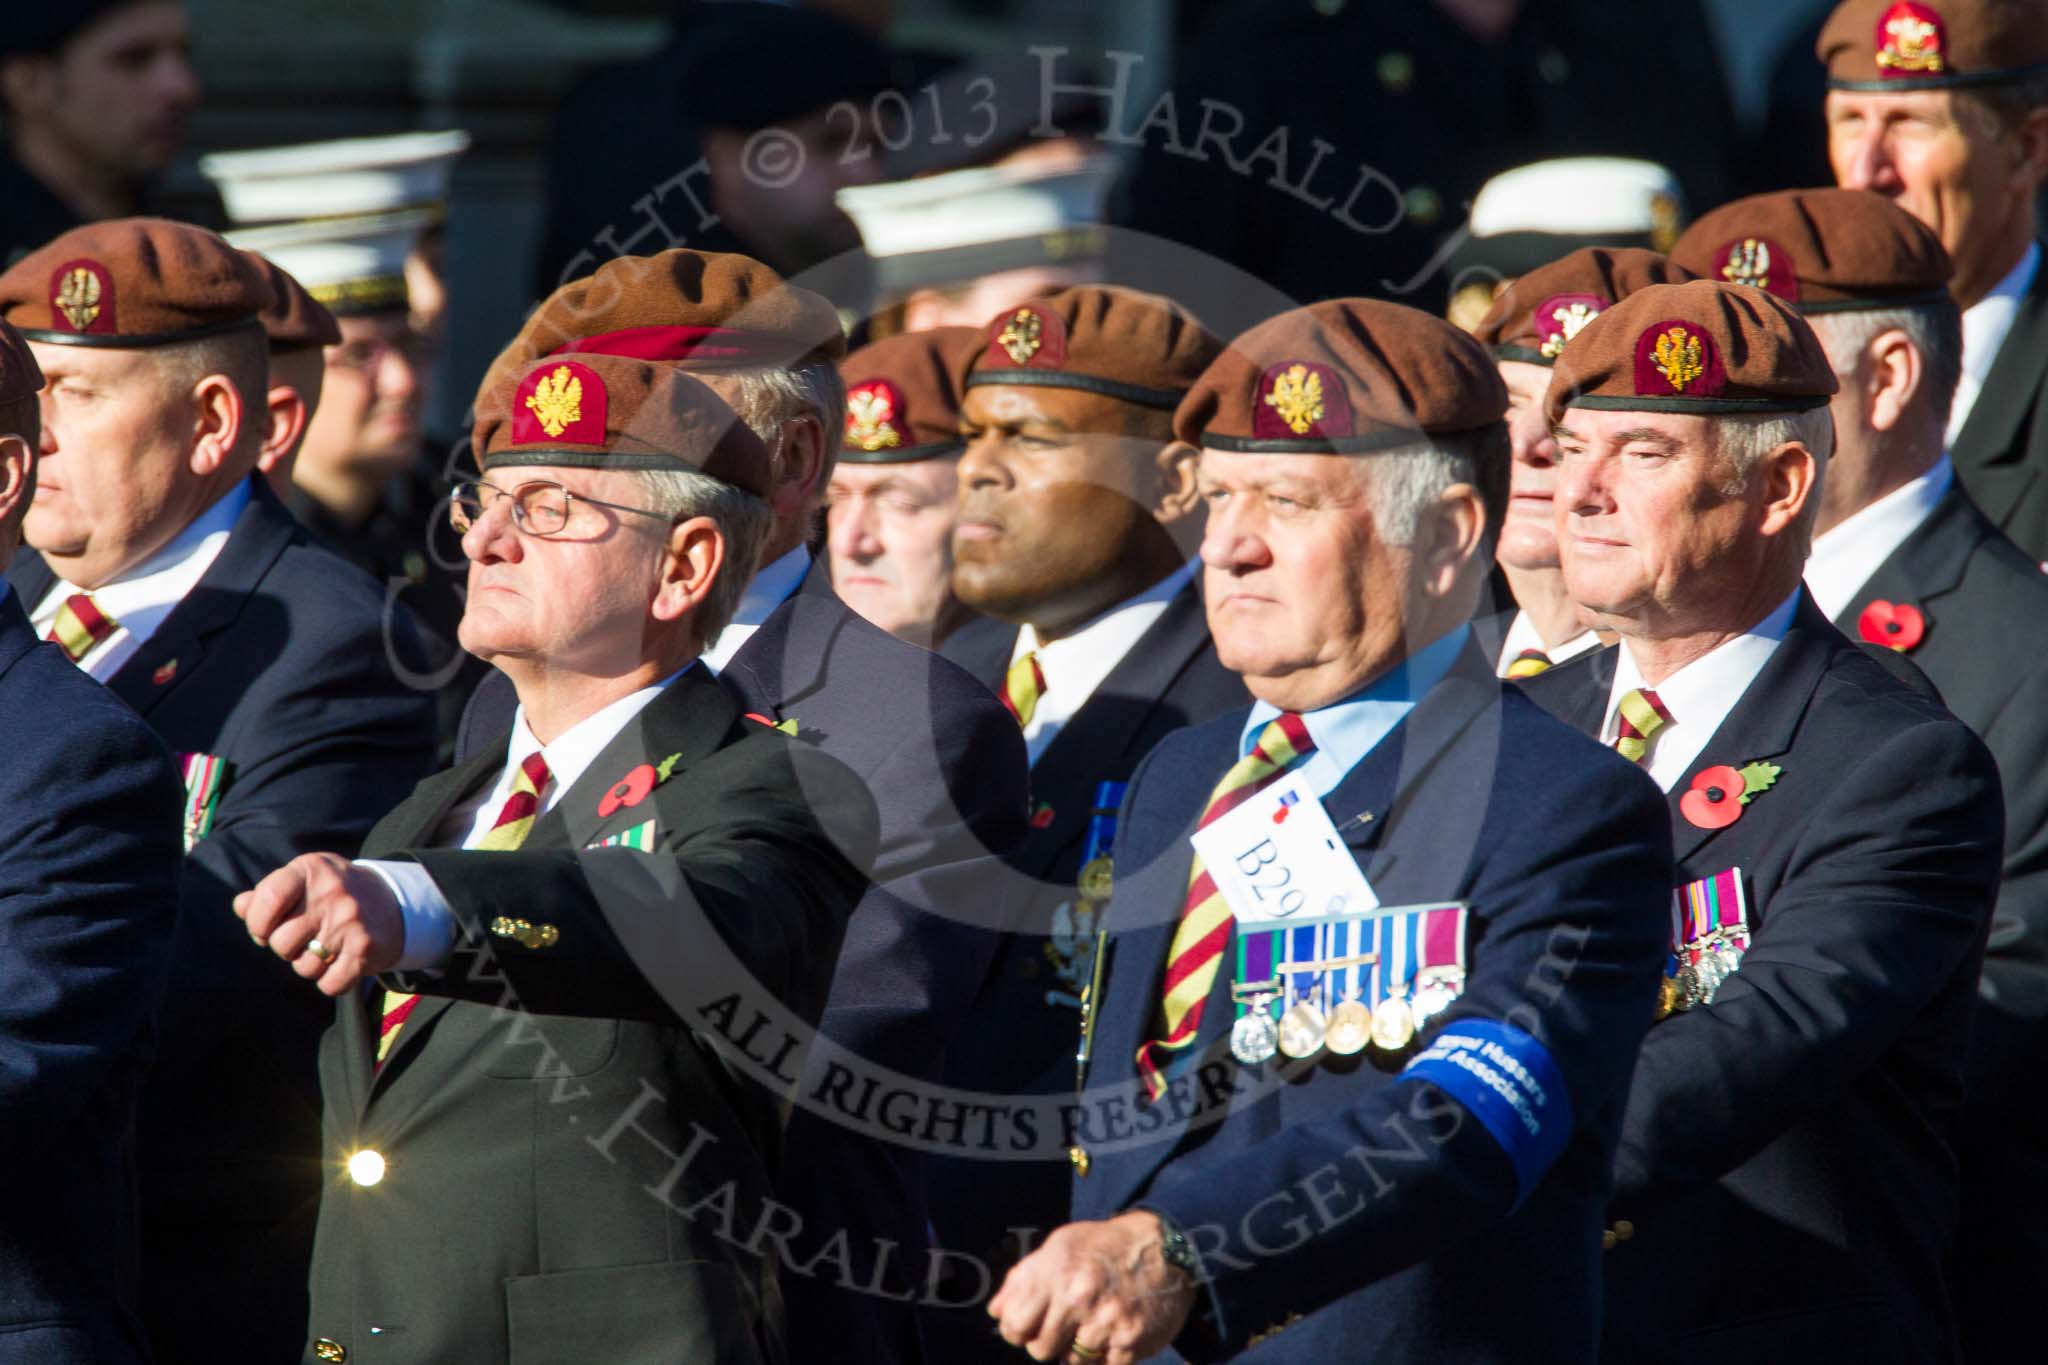 Remembrance Sunday at the Cenotaph in London 2014: Group B29 - Queen's Royal Hussars (The Queen's Own & Royal Irish).
Press stand opposite the Foreign Office building, Whitehall, London SW1,
London,
Greater London,
United Kingdom,
on 09 November 2014 at 12:12, image #1835